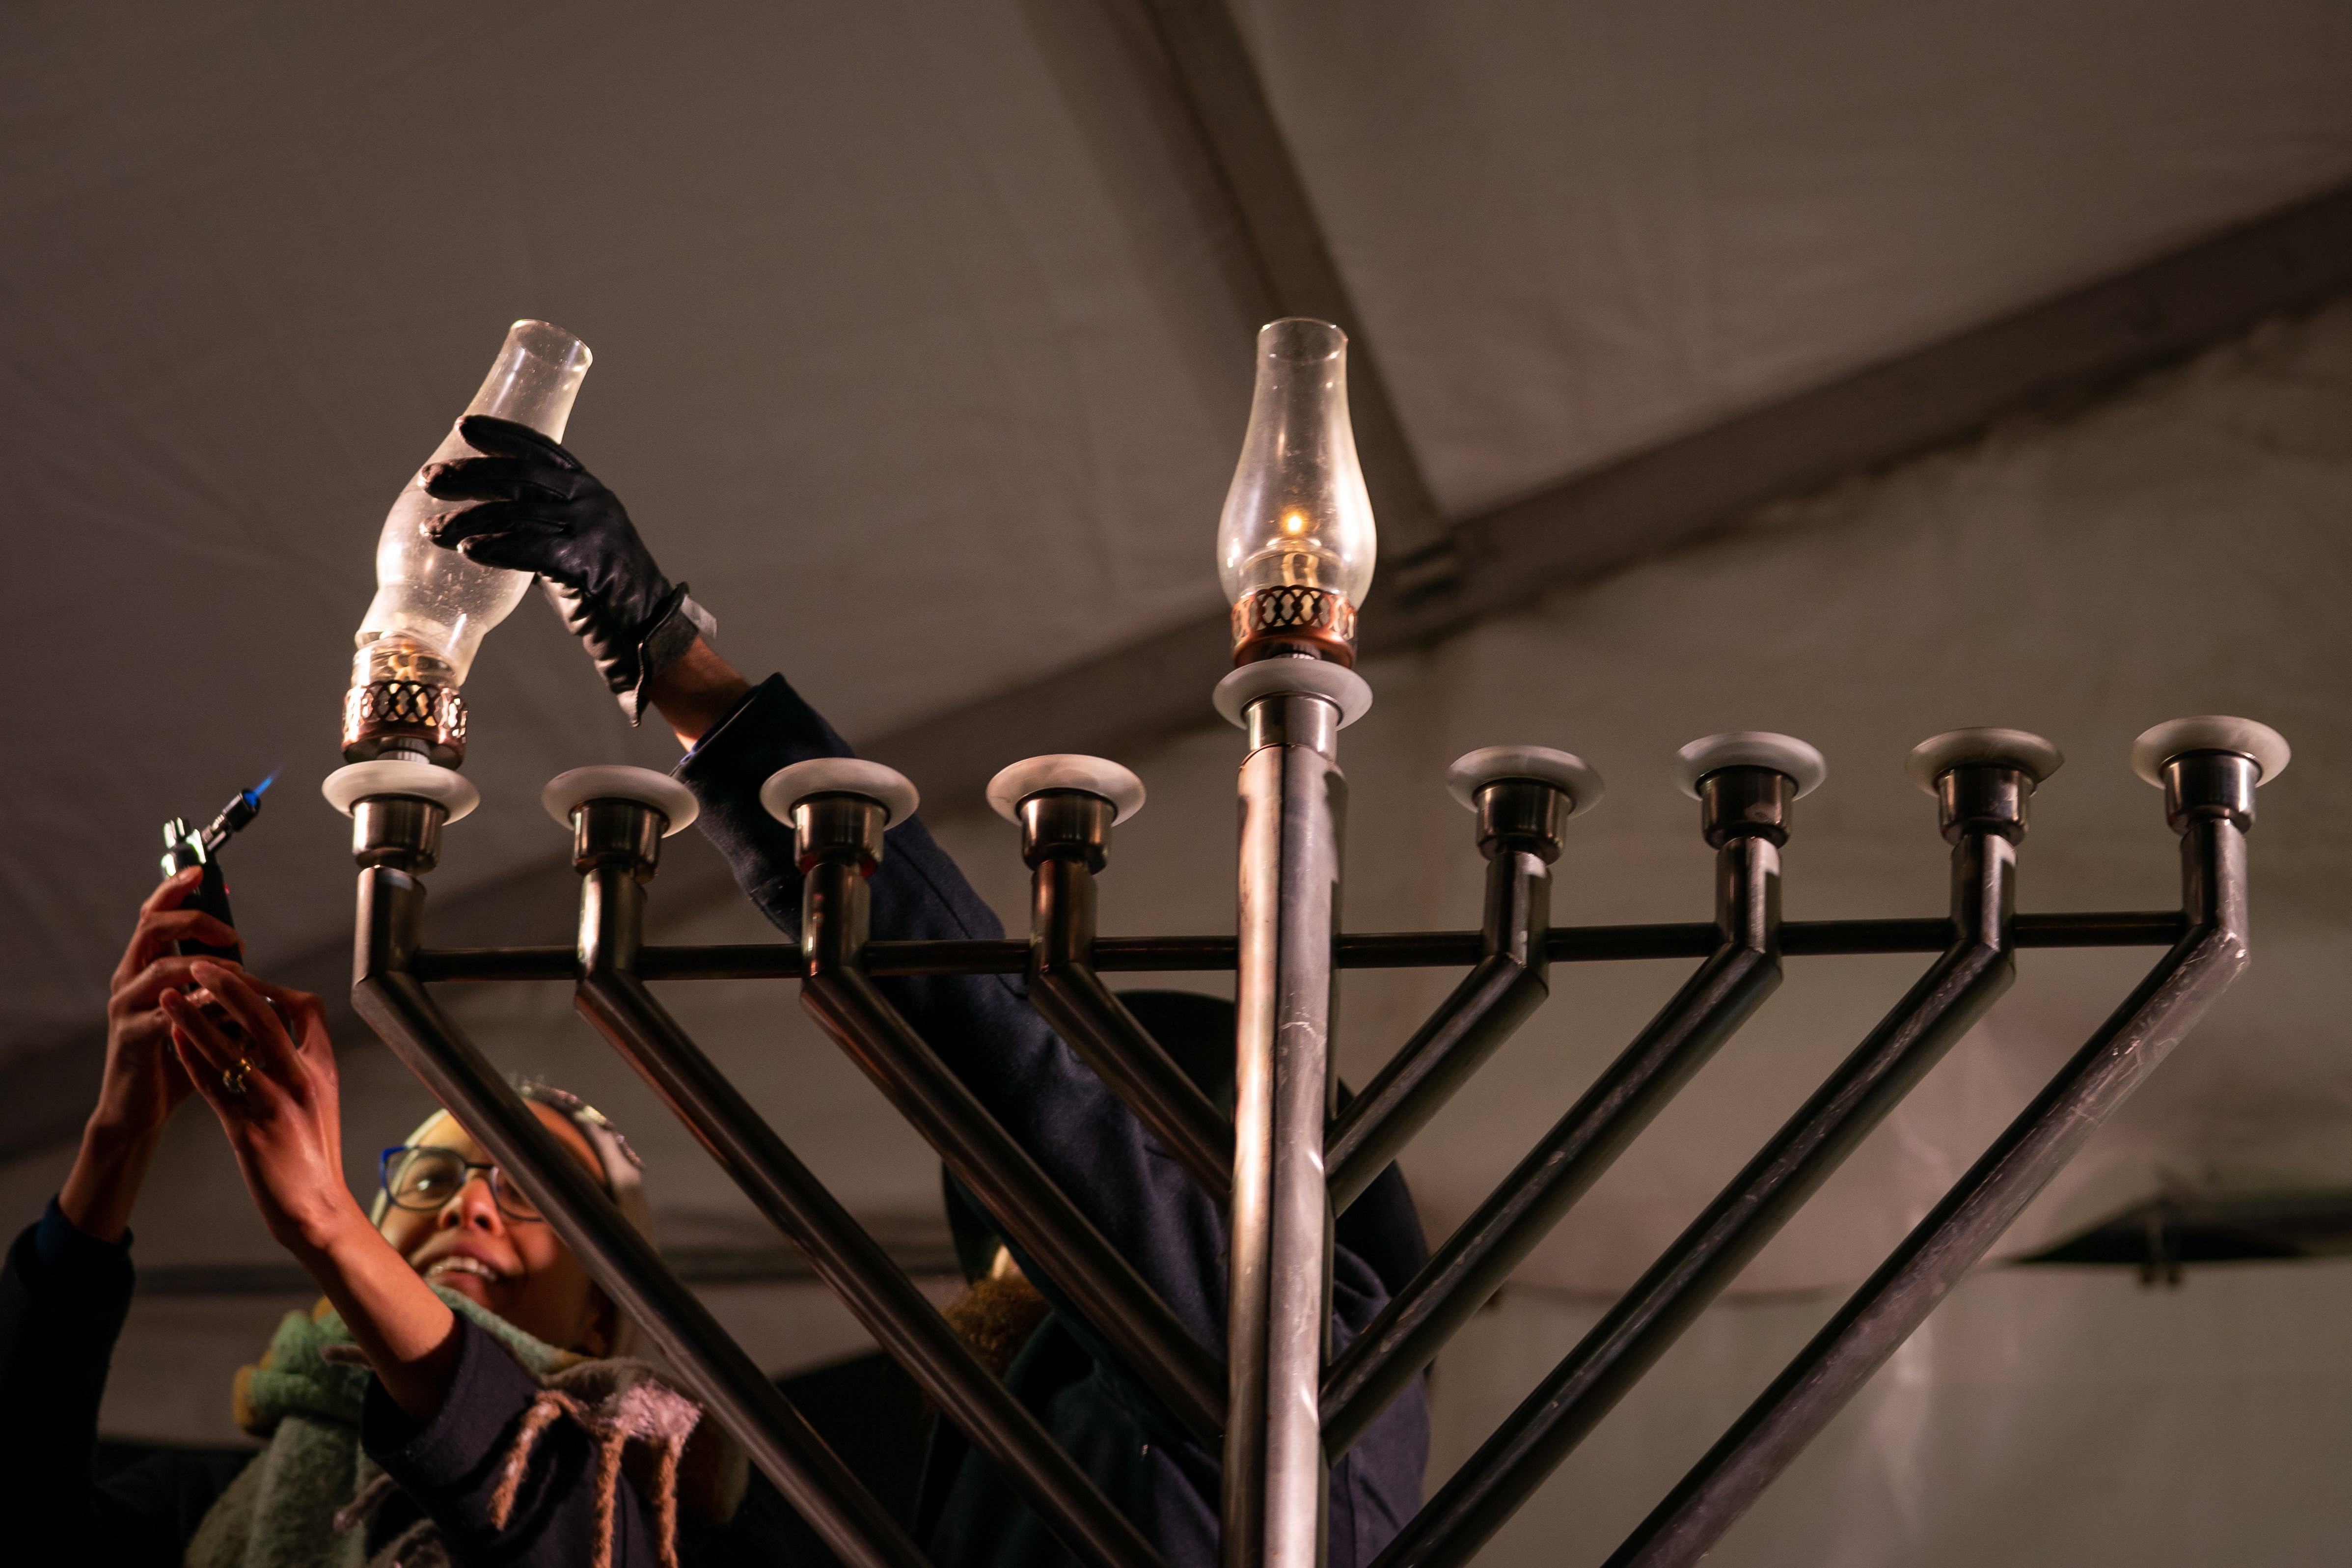 The Jewish festival of Hanukkah is celebrated with lighting eight-armed candelabras, or menorahs (Aaron Chown/PA)